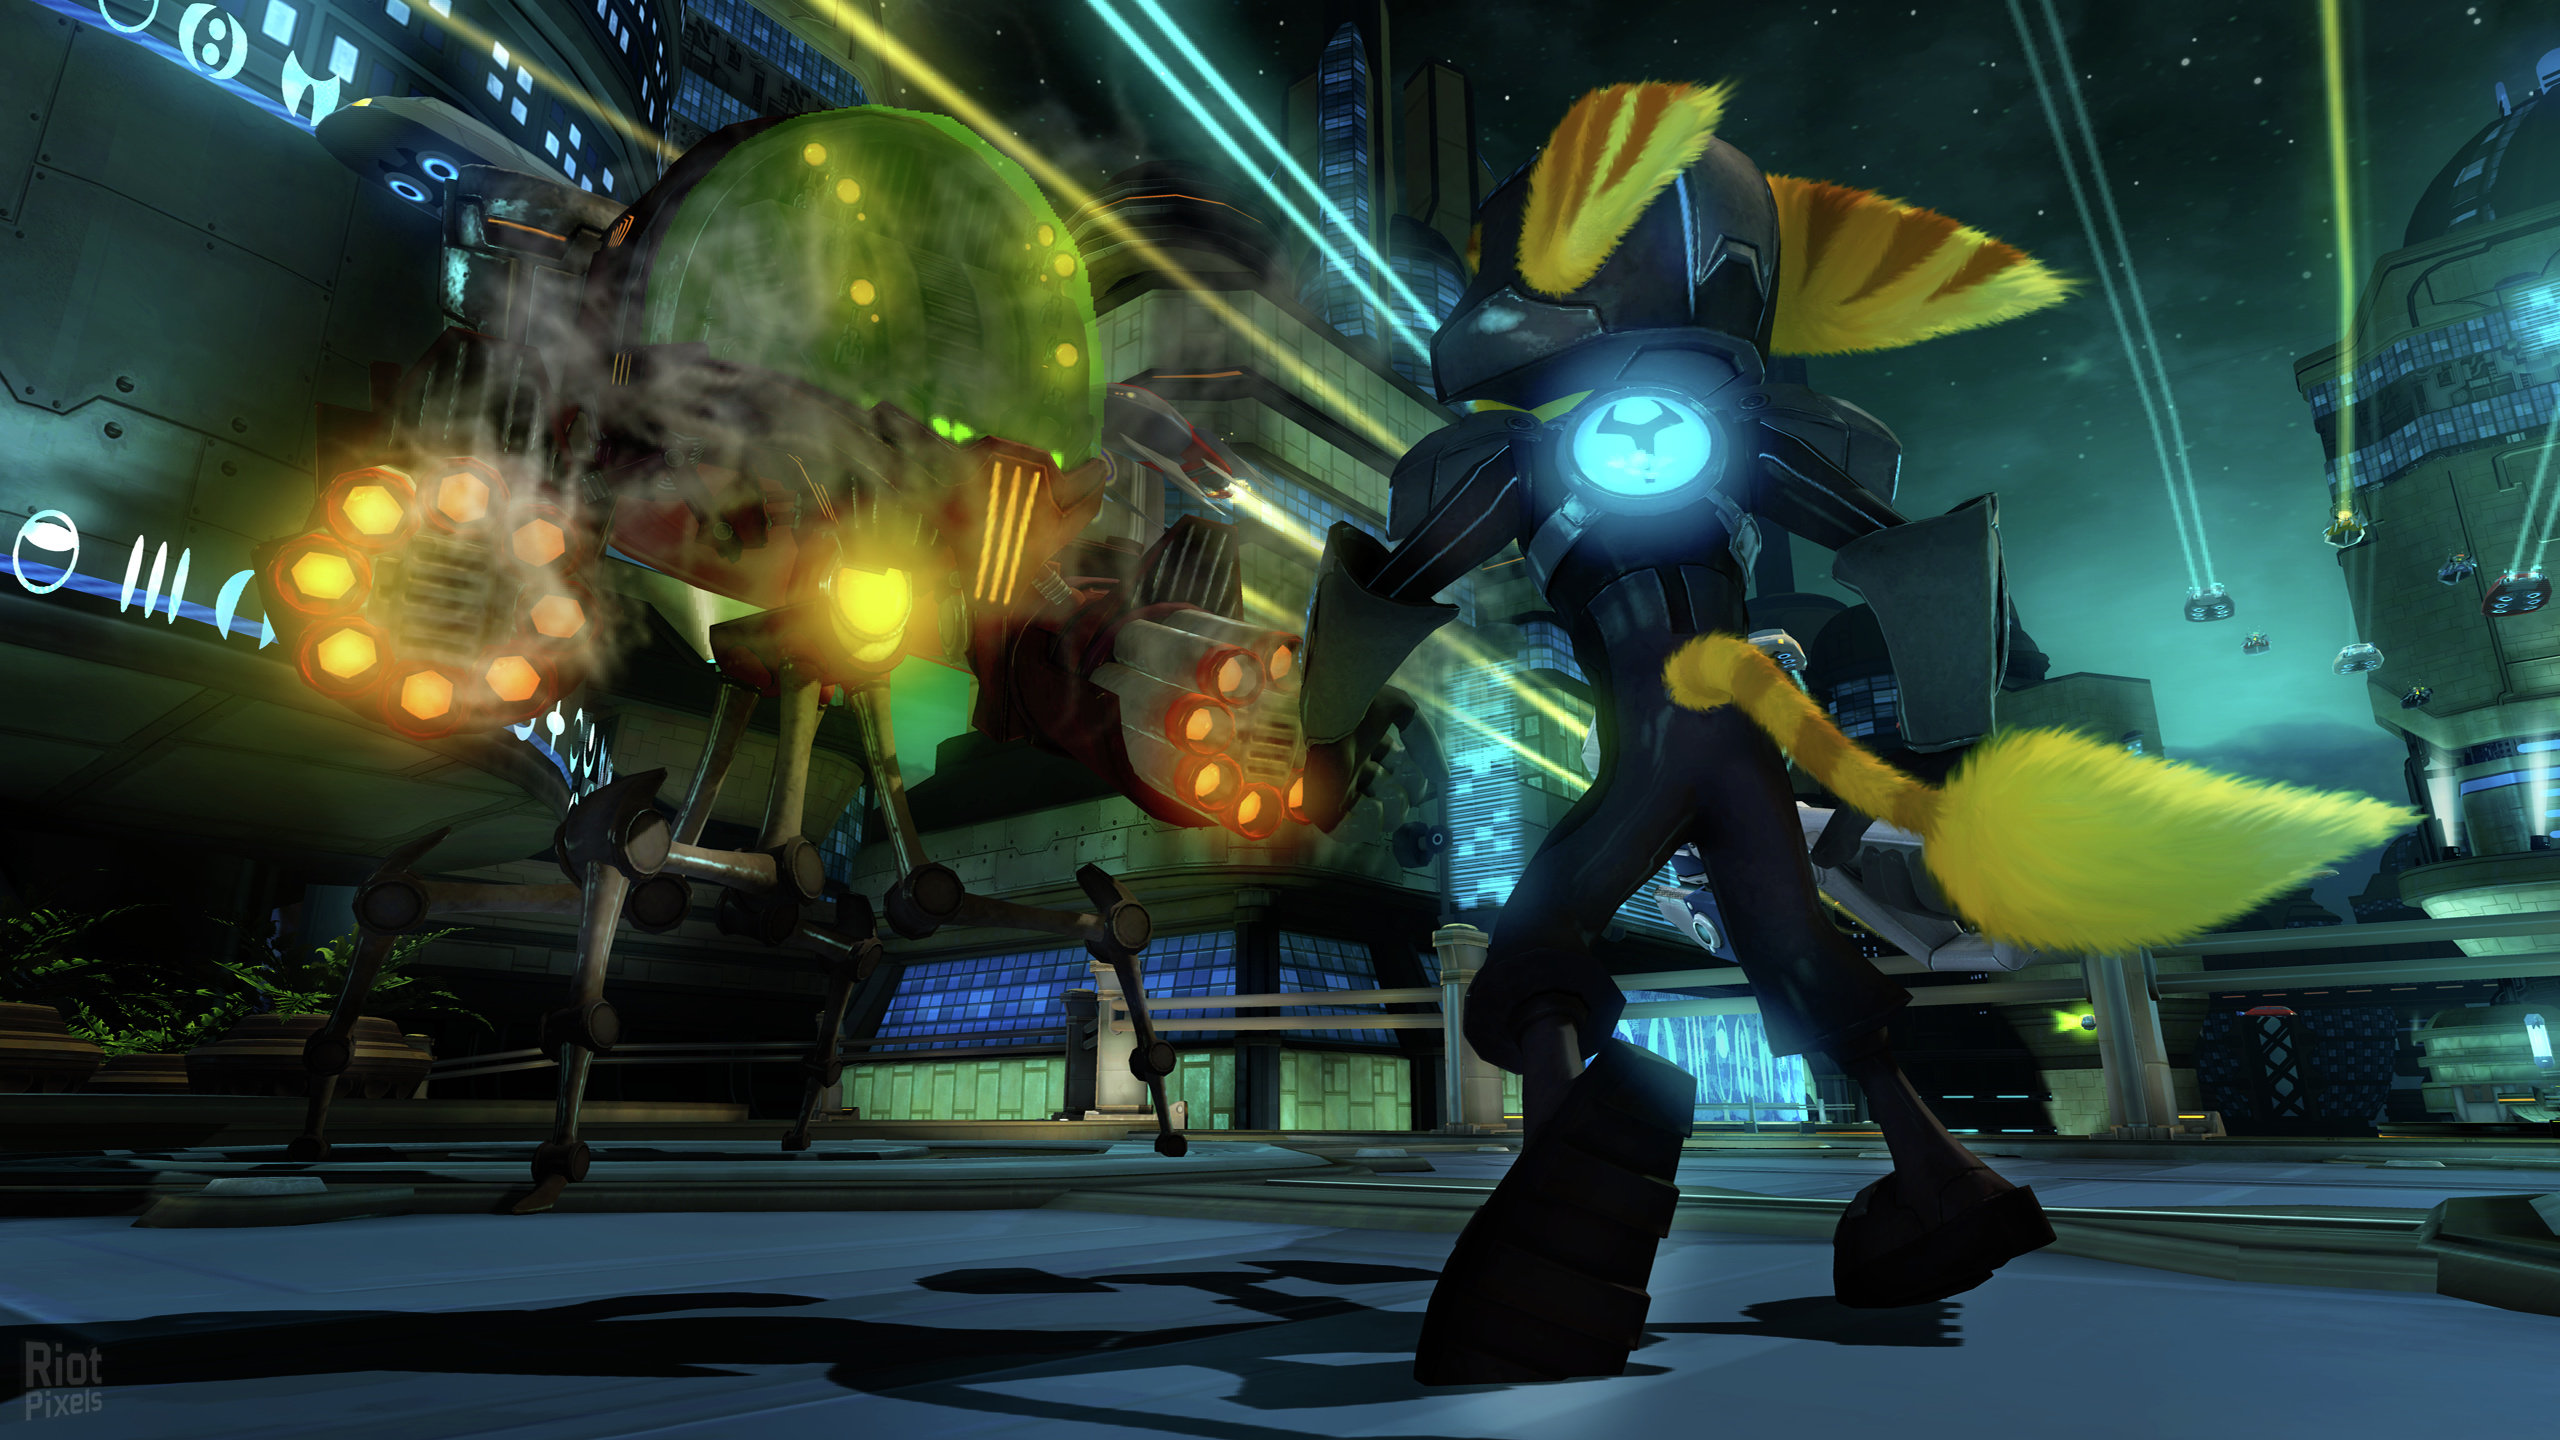 Ratchet & Clank: A Crack in Time. 